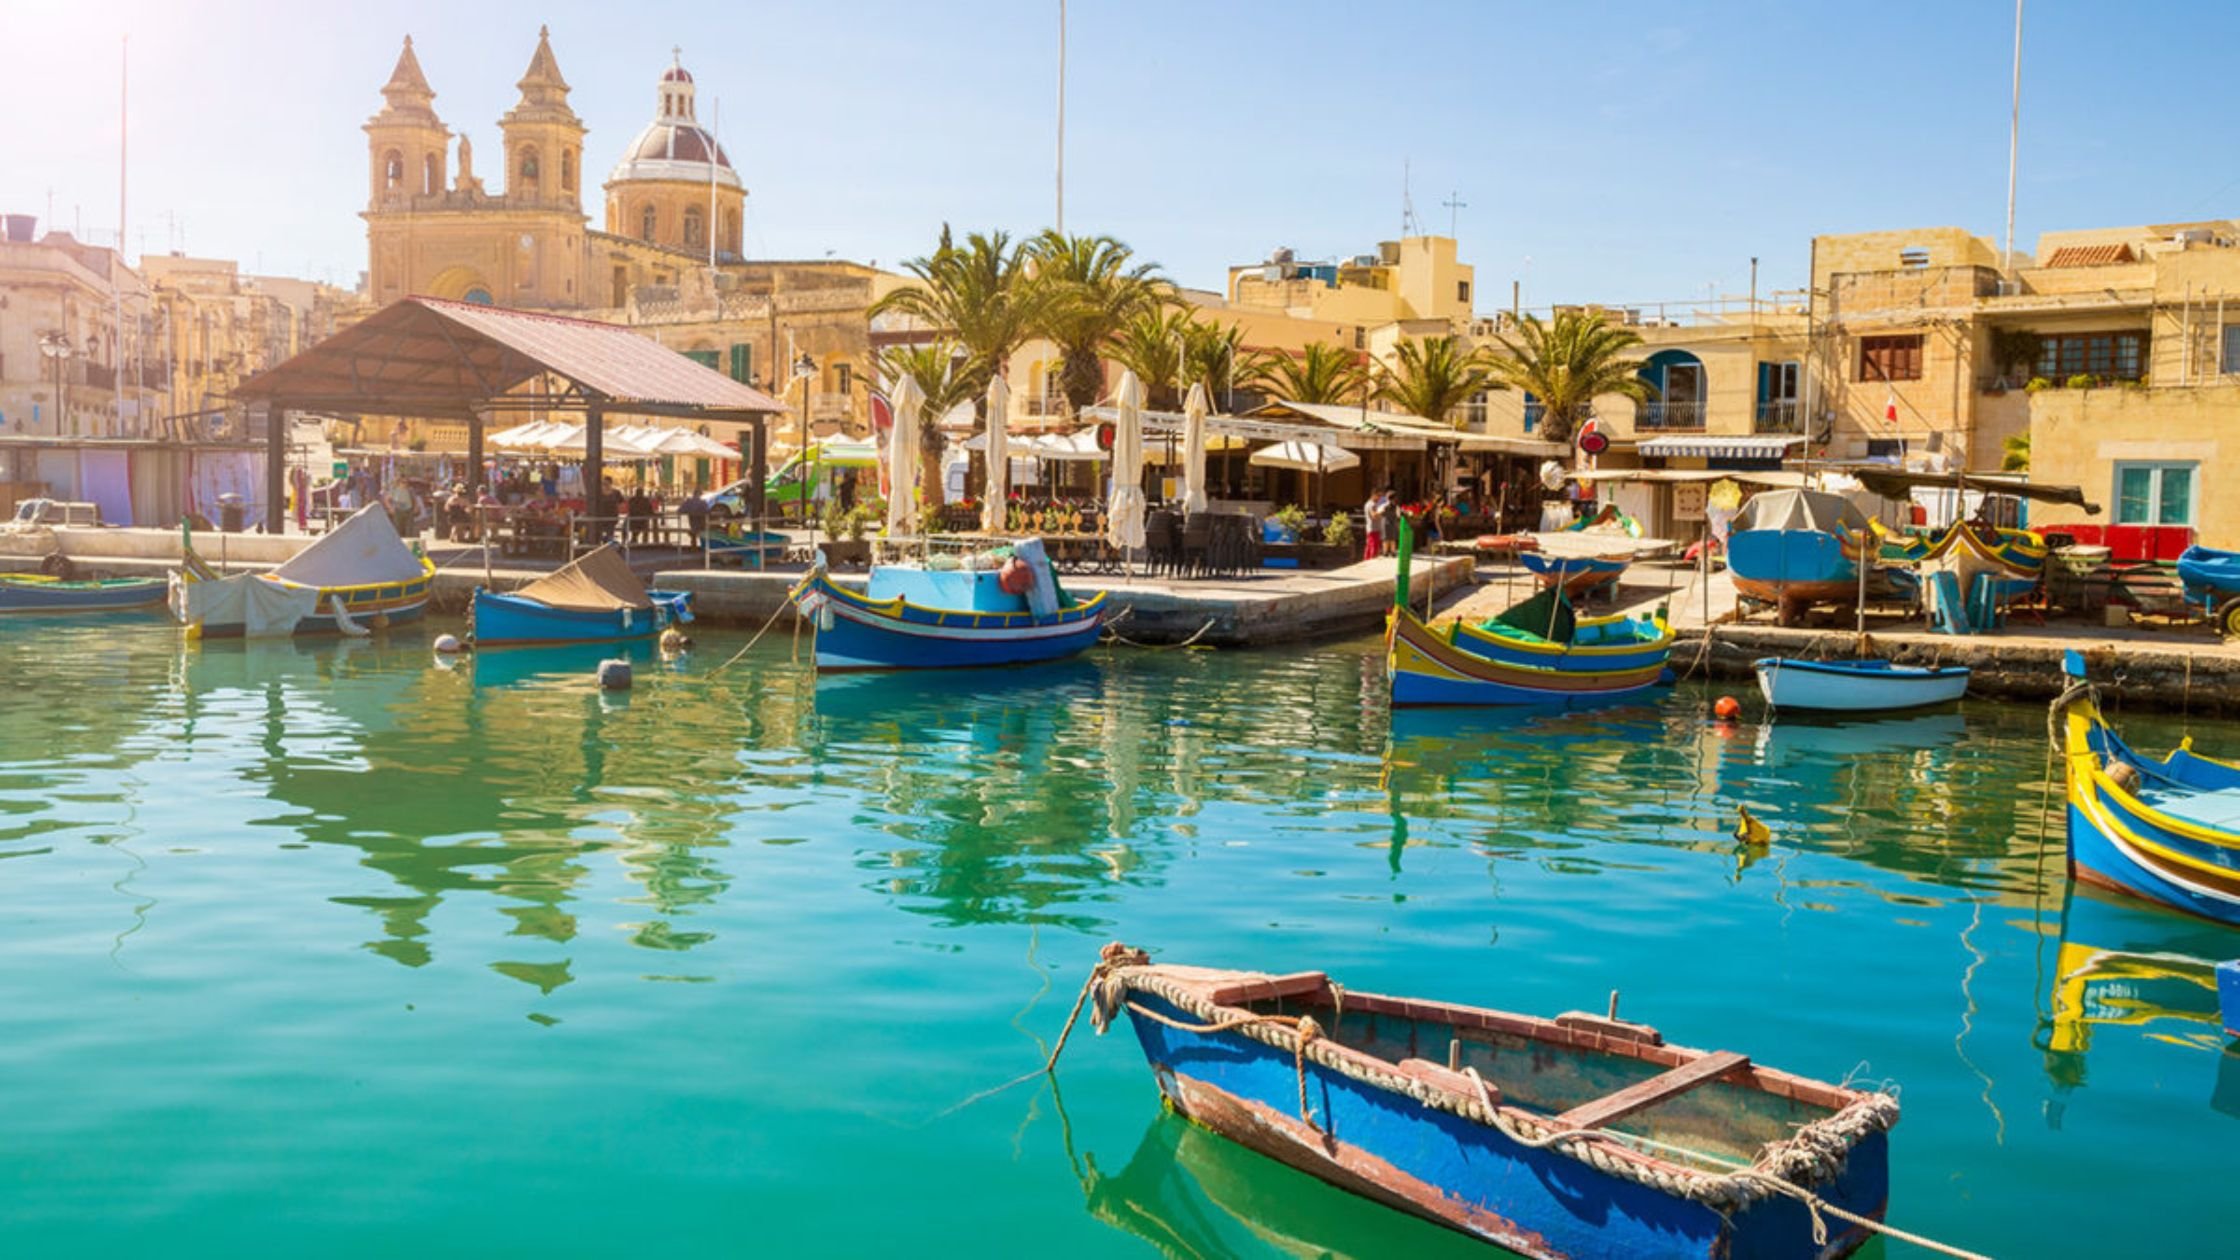 Malta's Citizenship by Investment program offers EU access and visa-free travel to 172+ countries, requiring a 12-36 month residency period